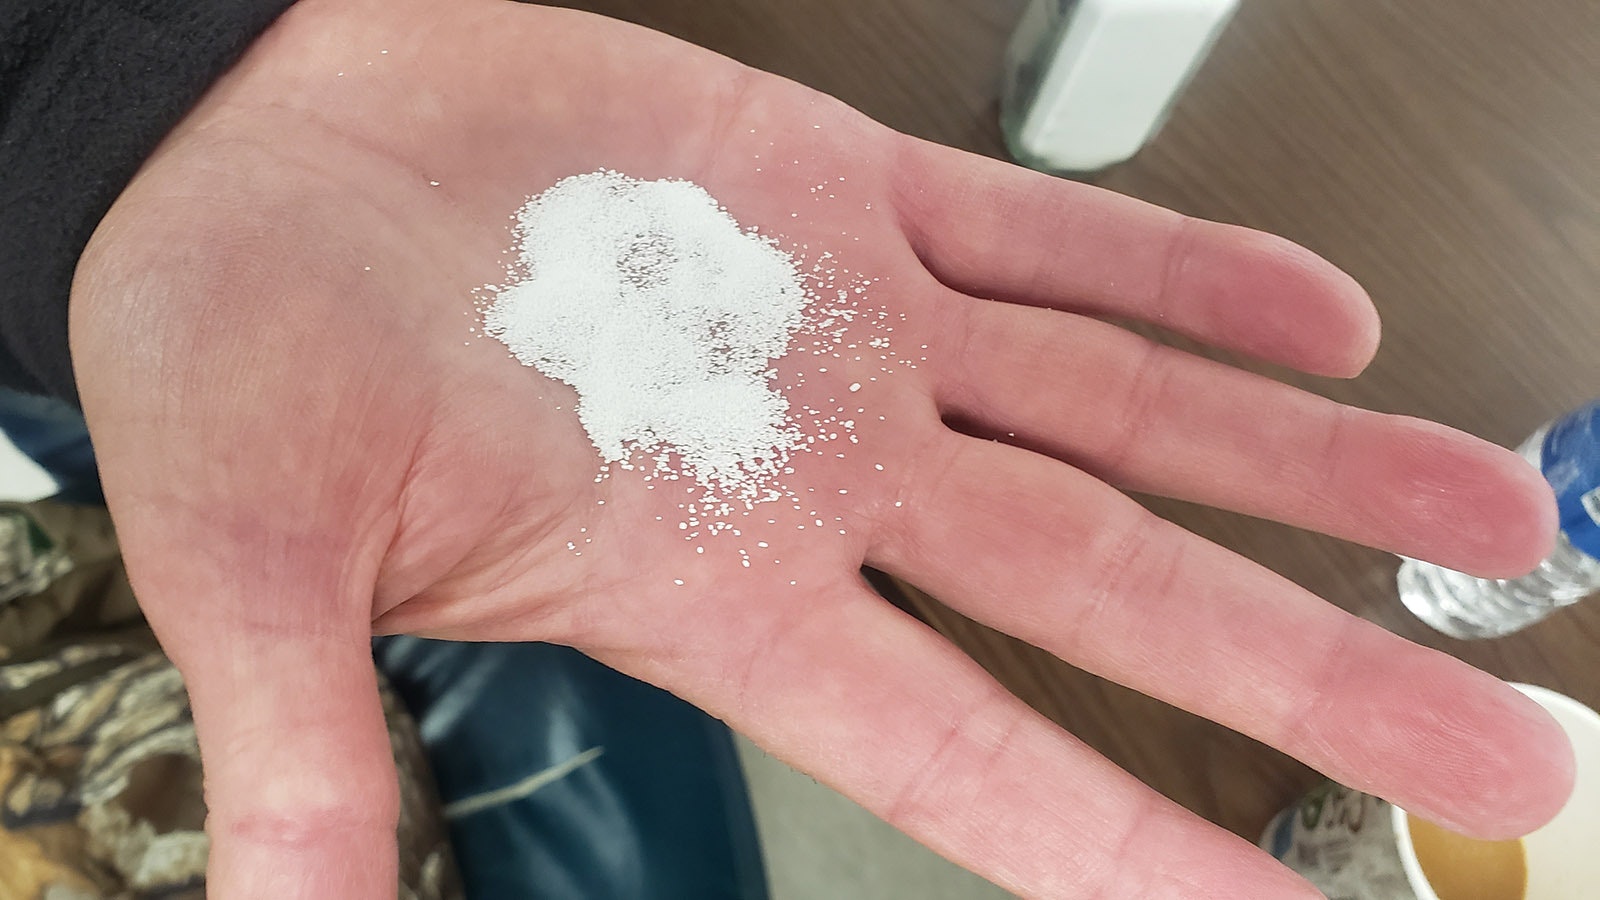 Soda ash can be made in several grades. This one that looks like grains of sand is used for glass-making.